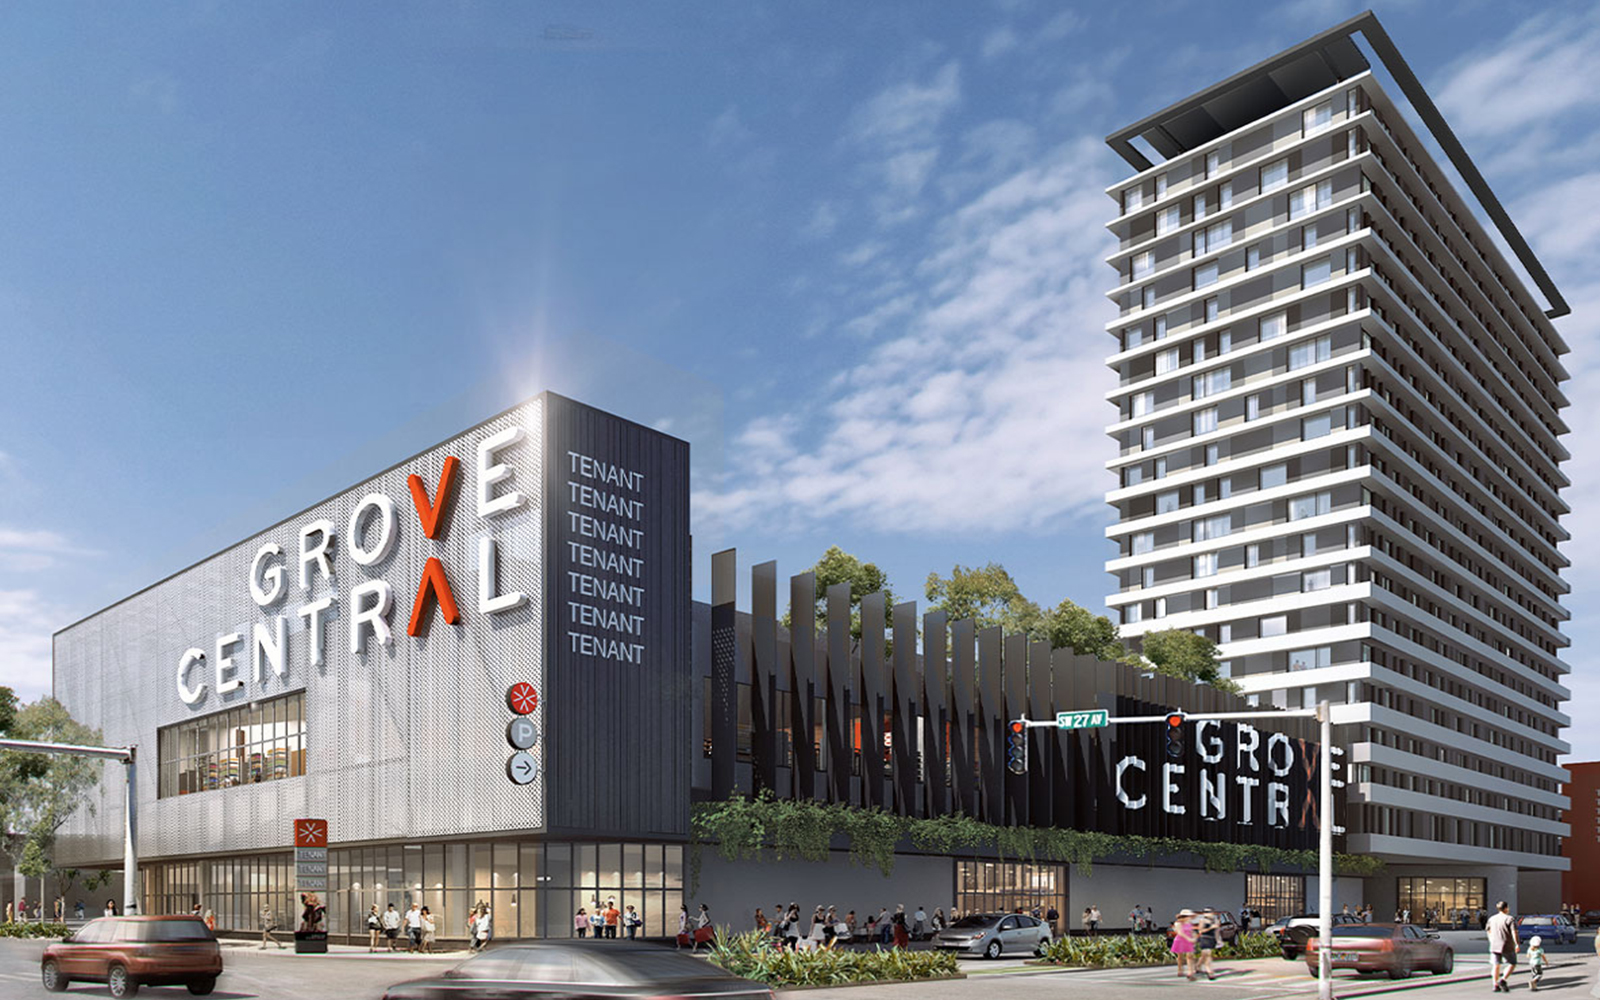 A rendering of the Grove Central project planned in Miami (Terra/Grass River Property)